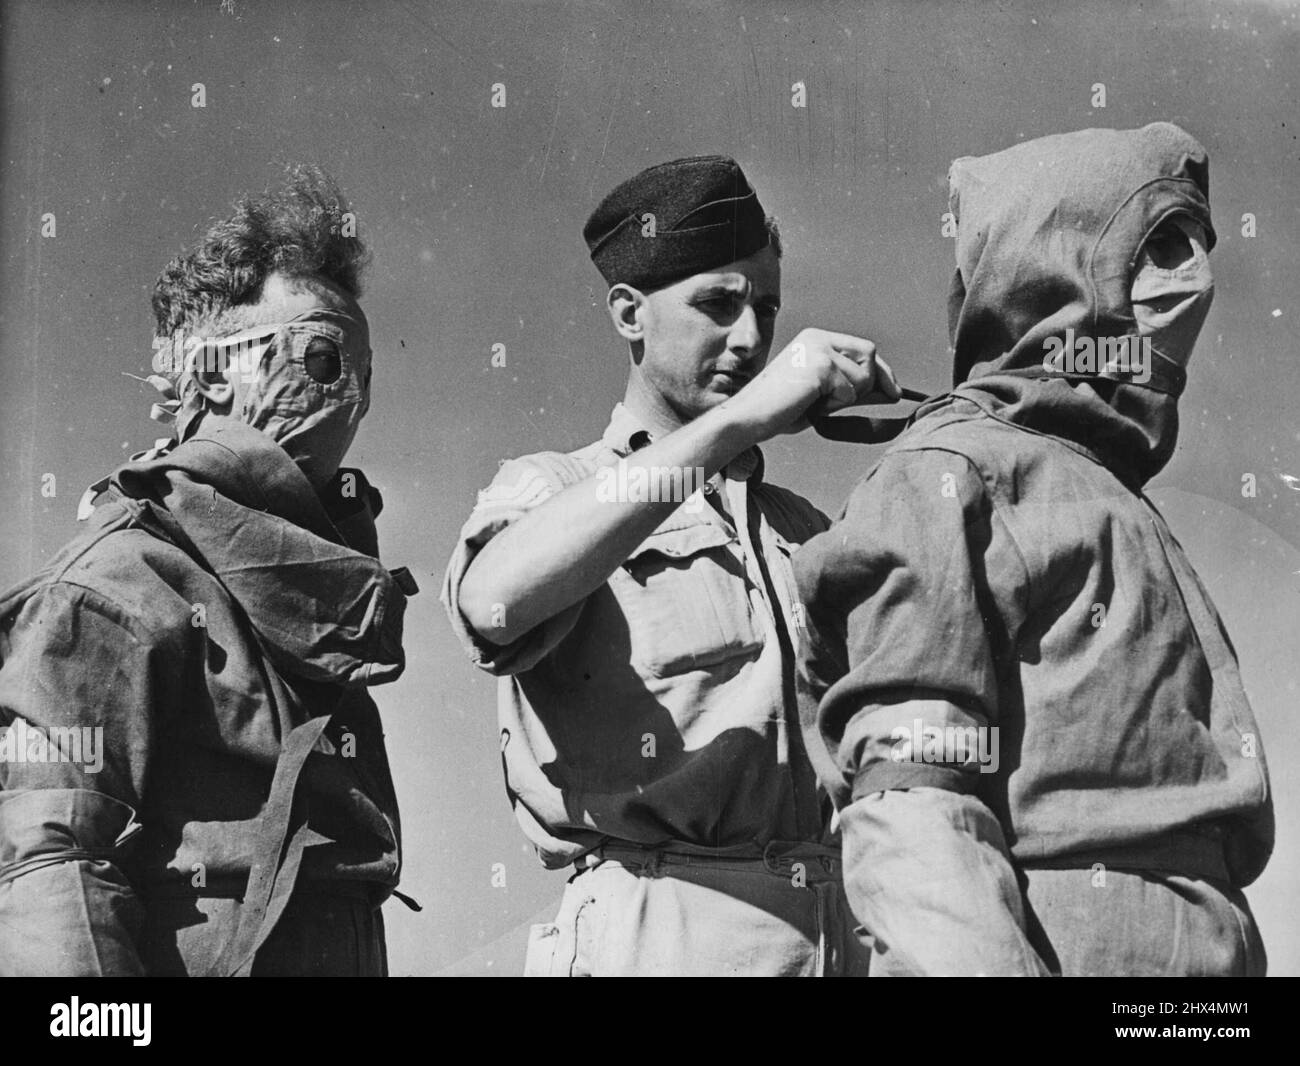 Airmen being helped on with their anti-typhus suits by a member of,the R.A.P. medical branch. The R.A.F. medical staff of the Evacuation Centres dealing with wounded partisans from Yugoslavia, wear anti-typhus suits to prevent them from picking up typhus lice inevitably carried by the partisans. The aircraft are fumigated immediately the wounded leave, and no one is allowed to enter the machines for at least 15 minutes. September 25, 1944. (Photo by British Official Photograph). Stock Photo